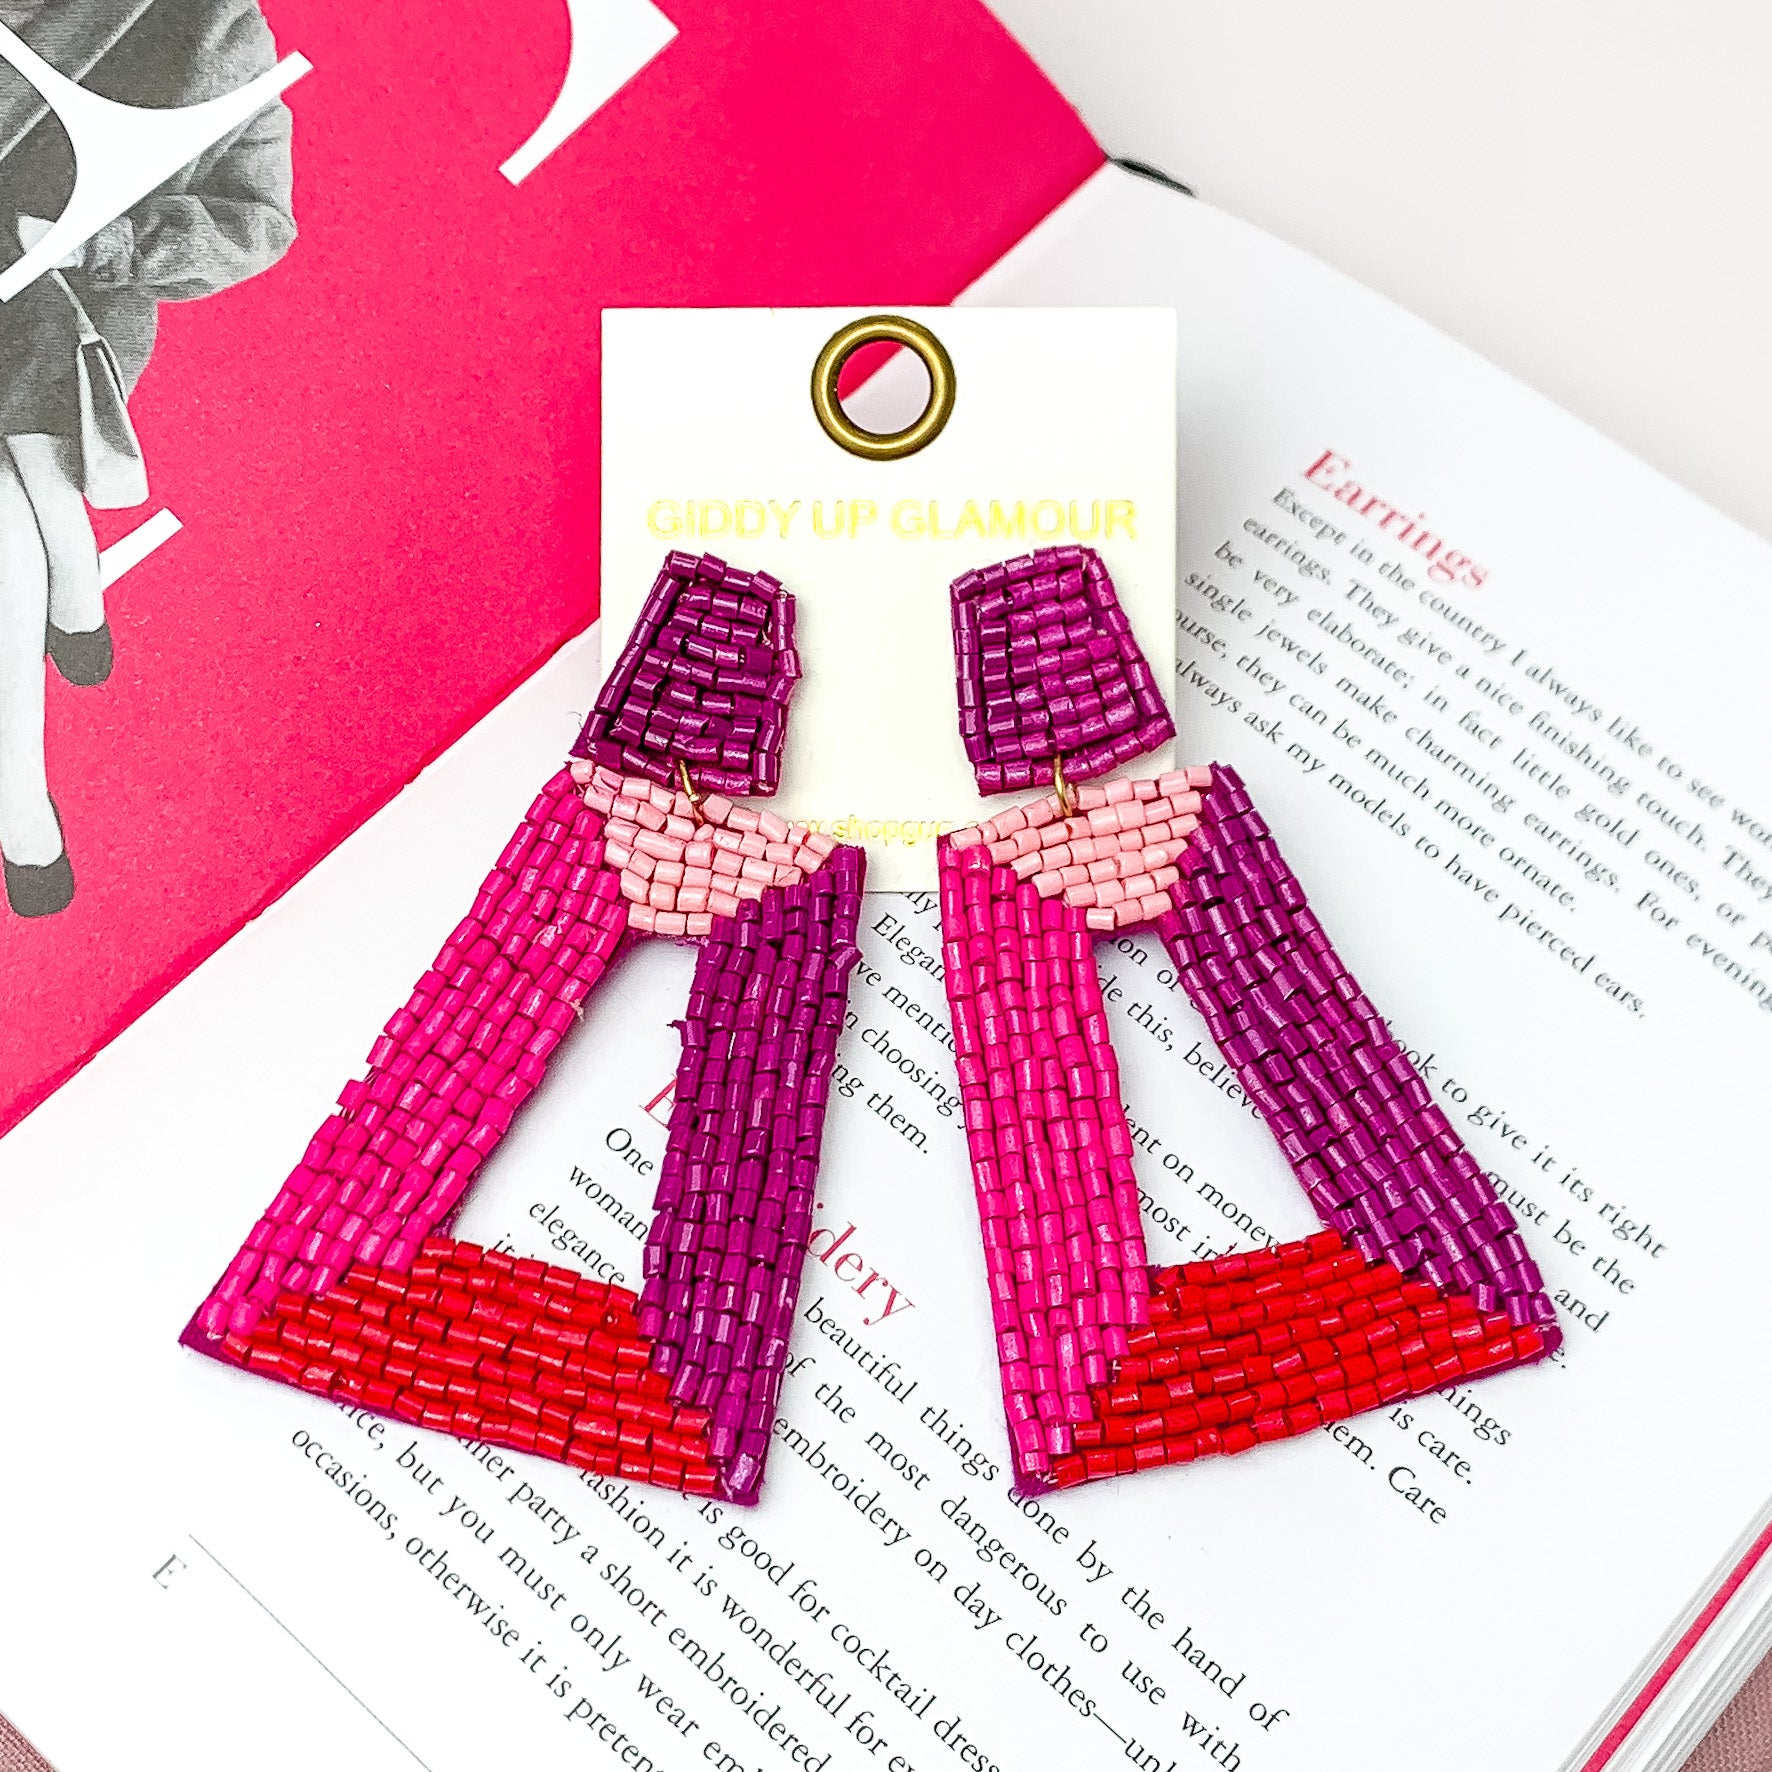 Beaded Rectangle Designed Earrings in Pink, Red, and Purple. Pictured on a white background with a book behind the earrings. 